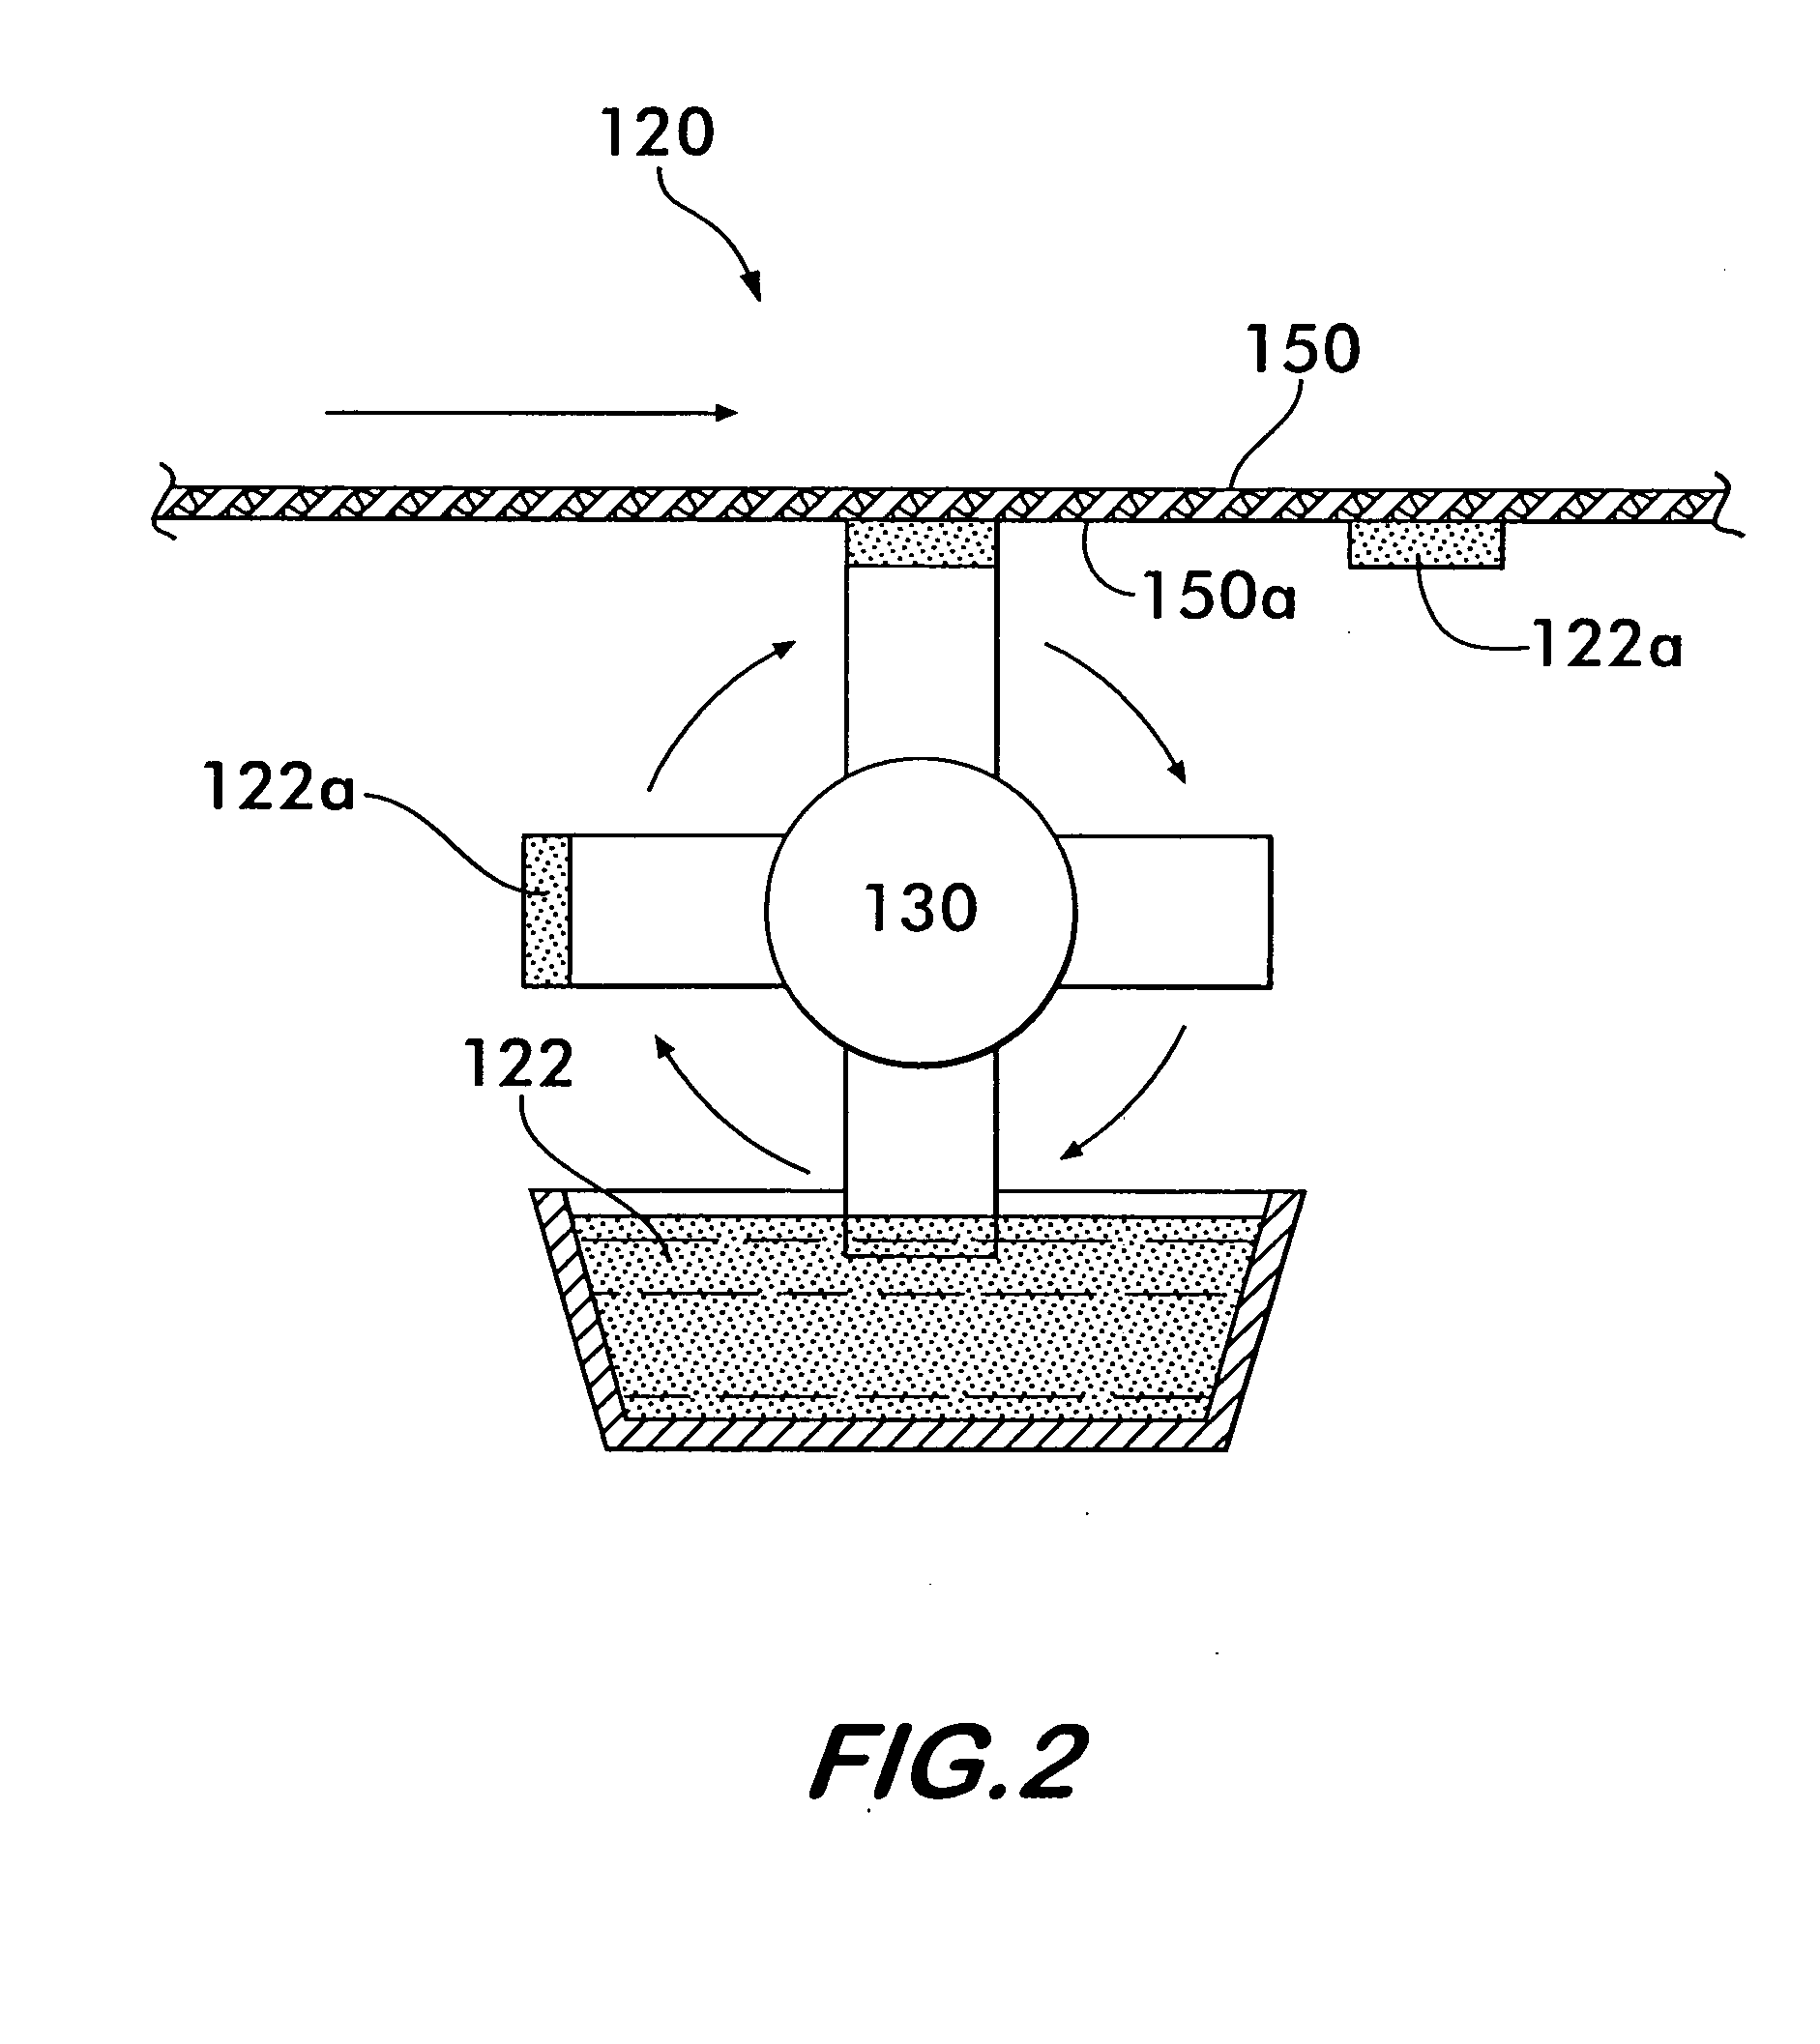 Security tag system for fabricating a tag including an integrated surface processing system